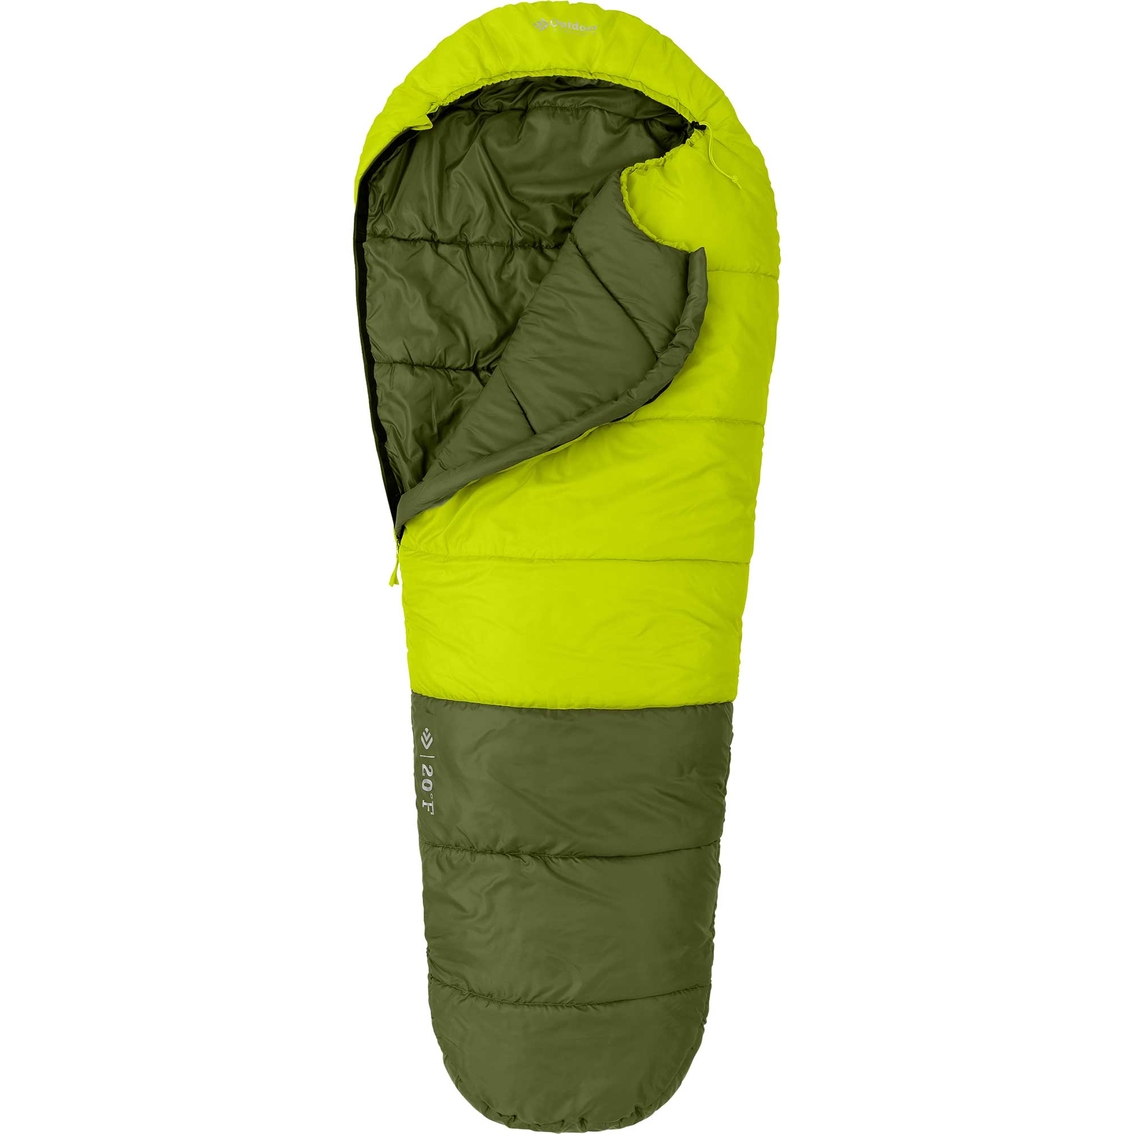 Outdoor Products 20F Mummy Sleeping Bag - Image 2 of 10